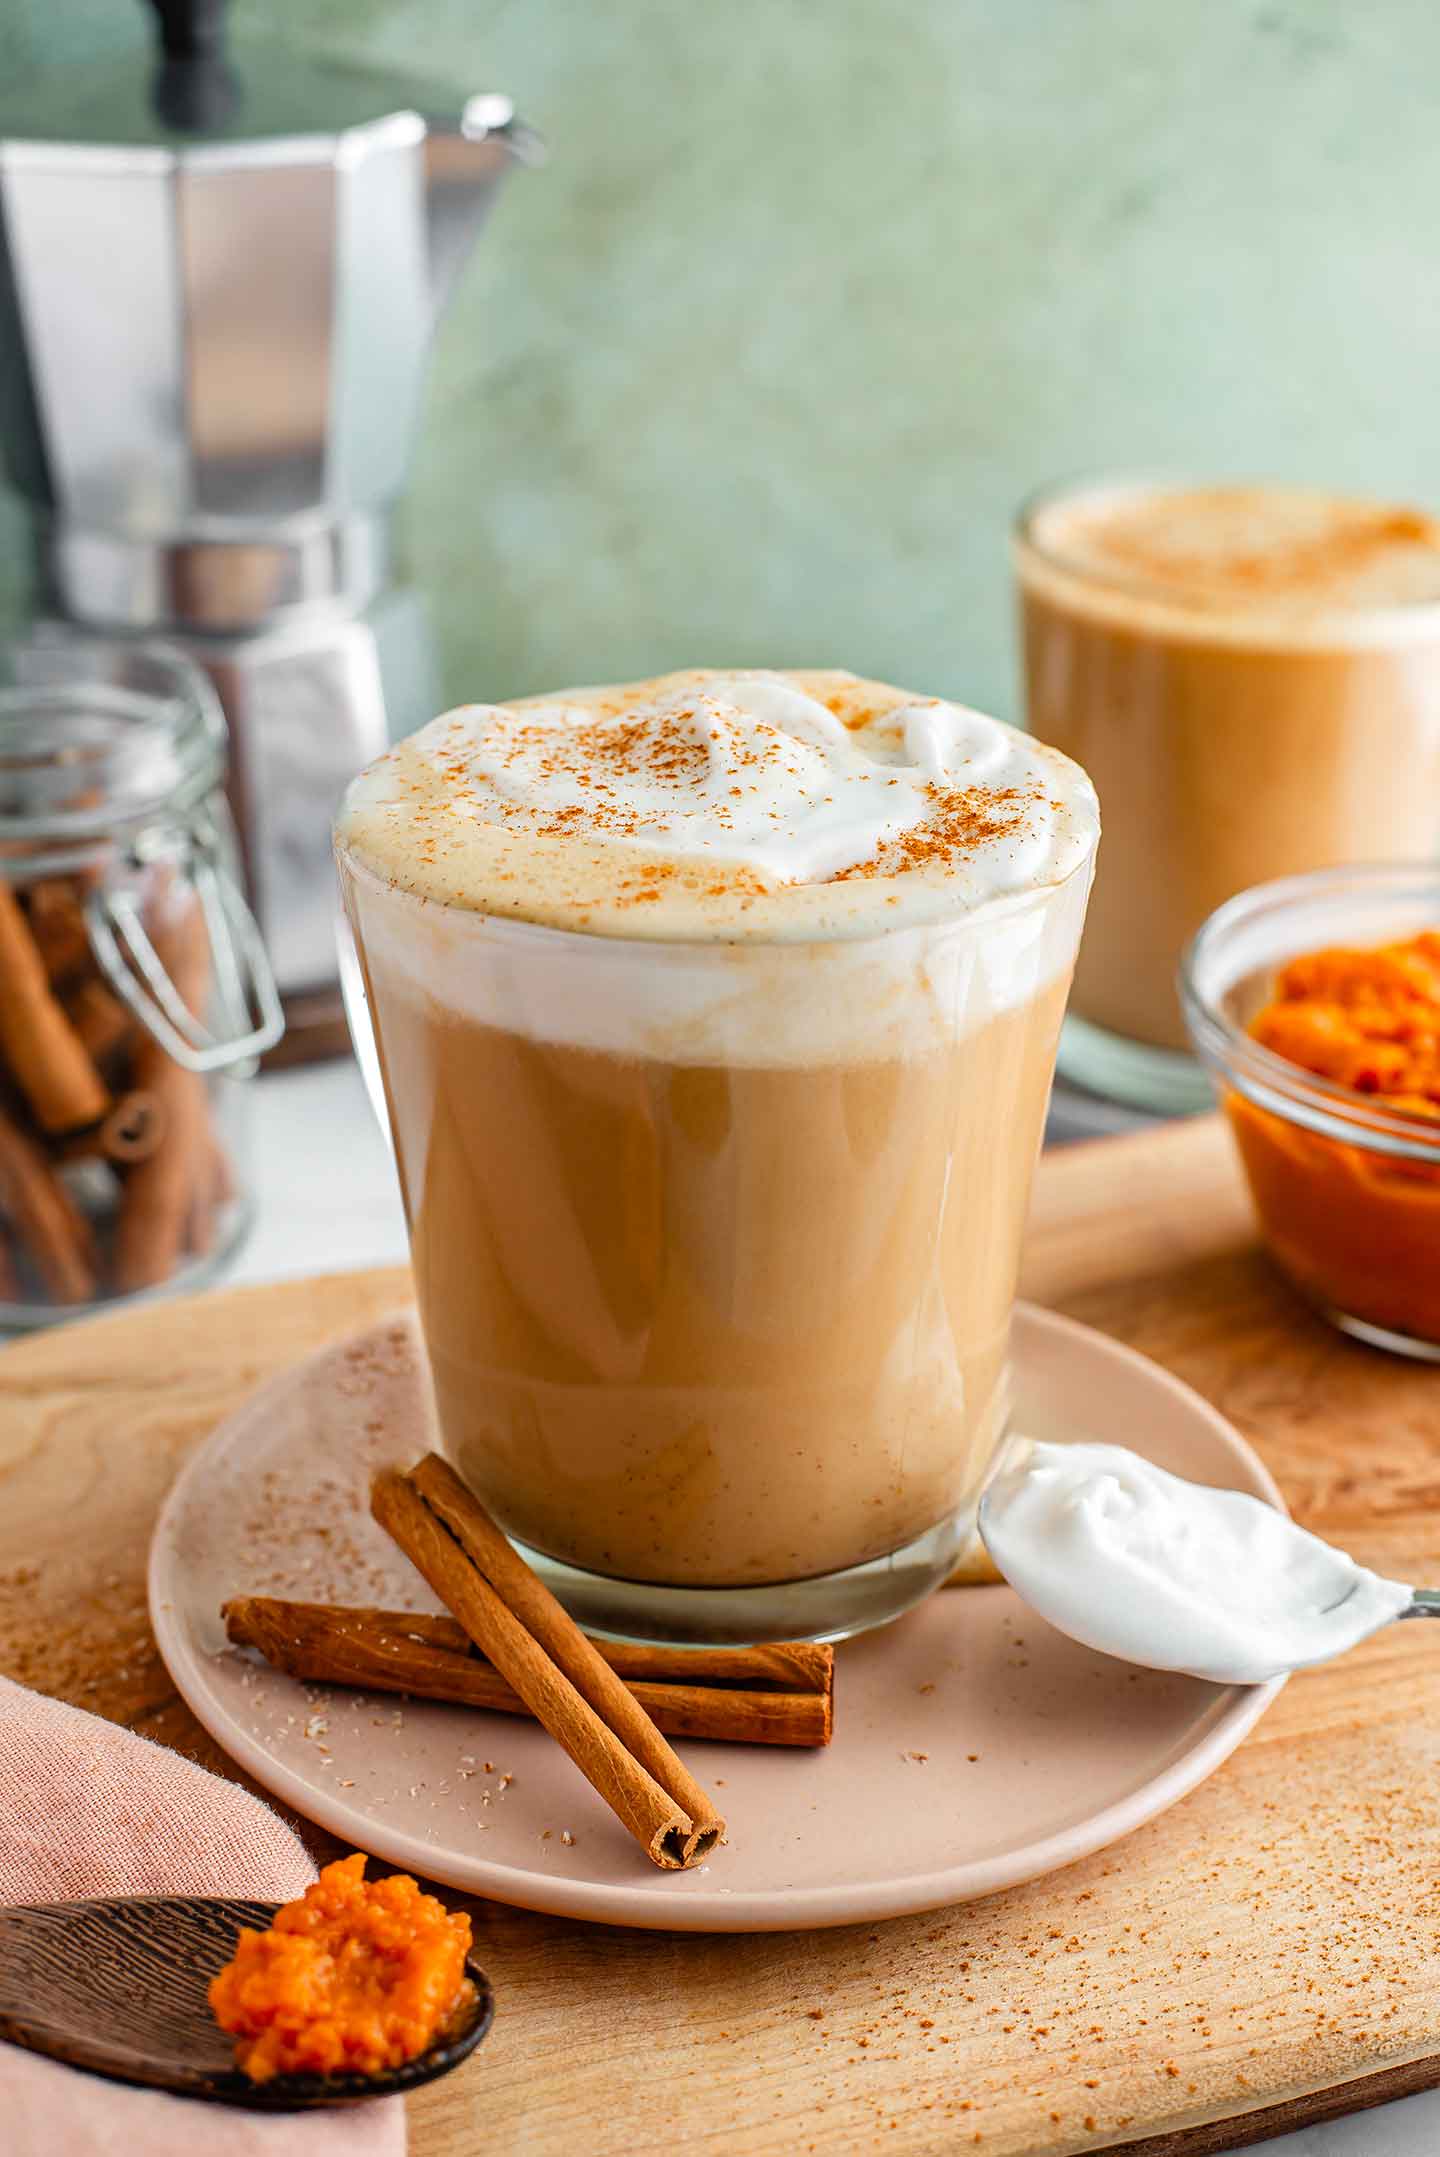 Side view of a warm vegan pumpkin spice latte in a glass mug. Whipped cream garnishes the top and a second latte with no whip is in the background.